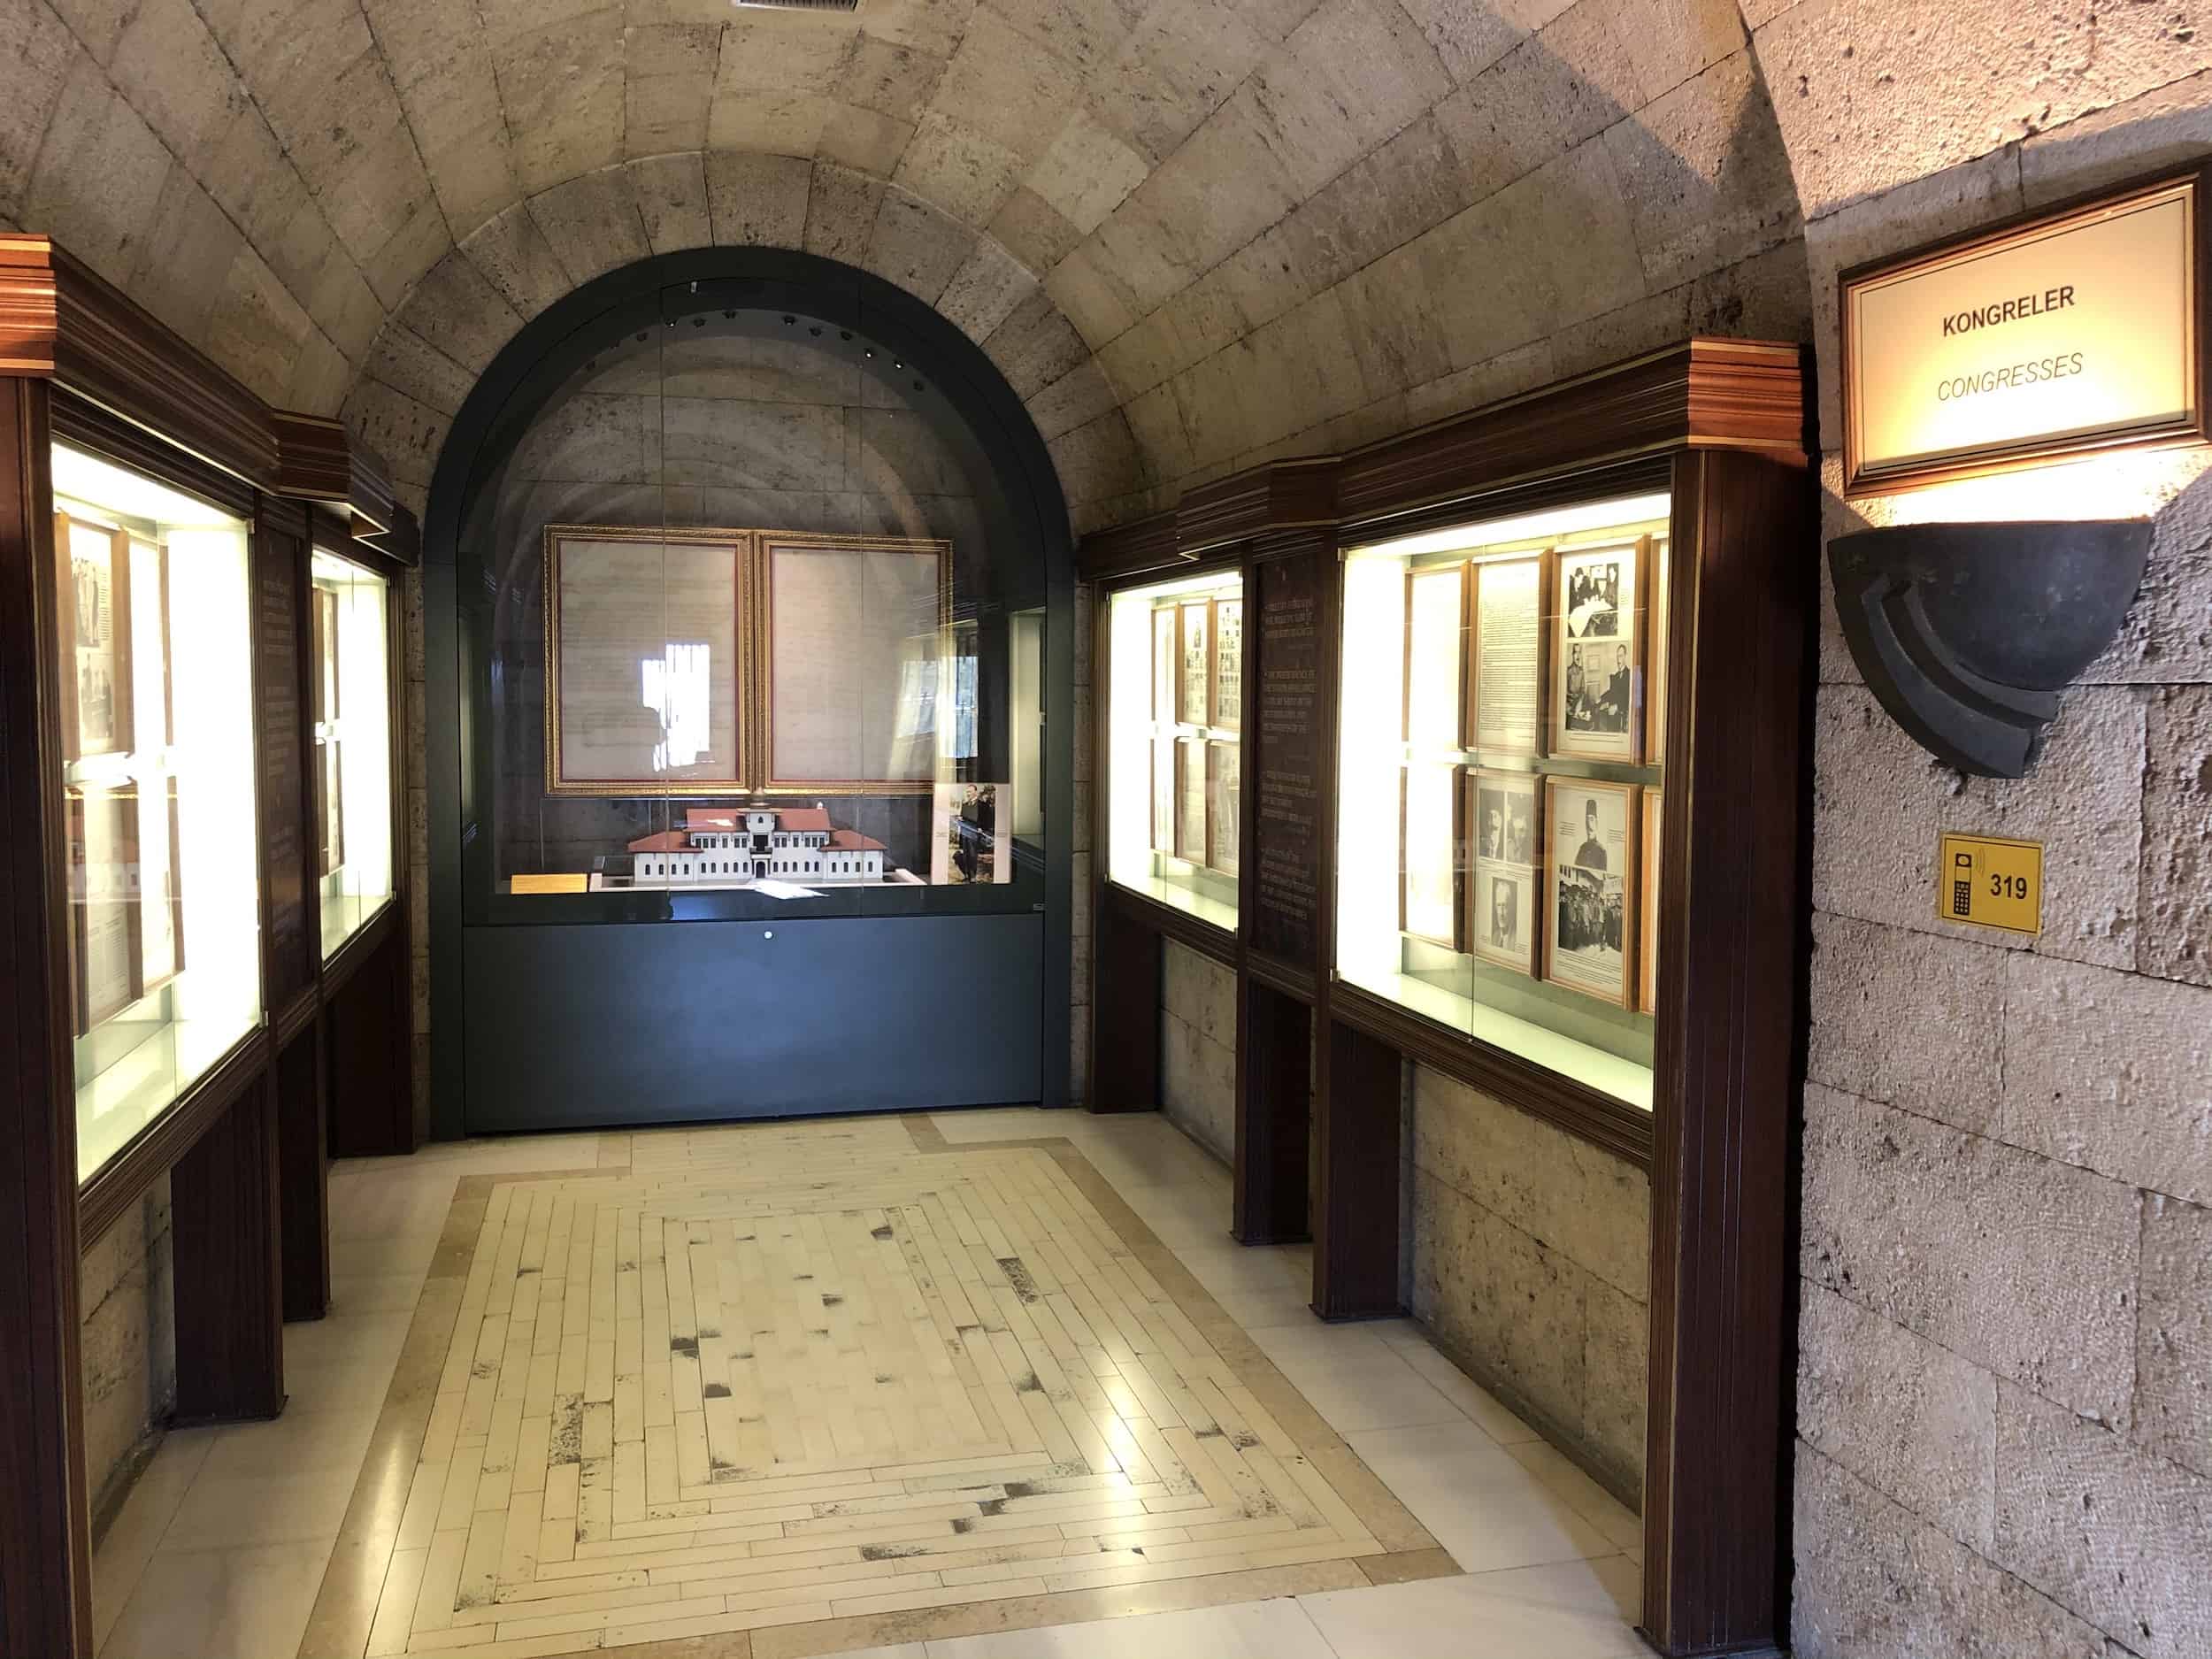 Turkish congresses at the Atatürk and War of Independence Museum